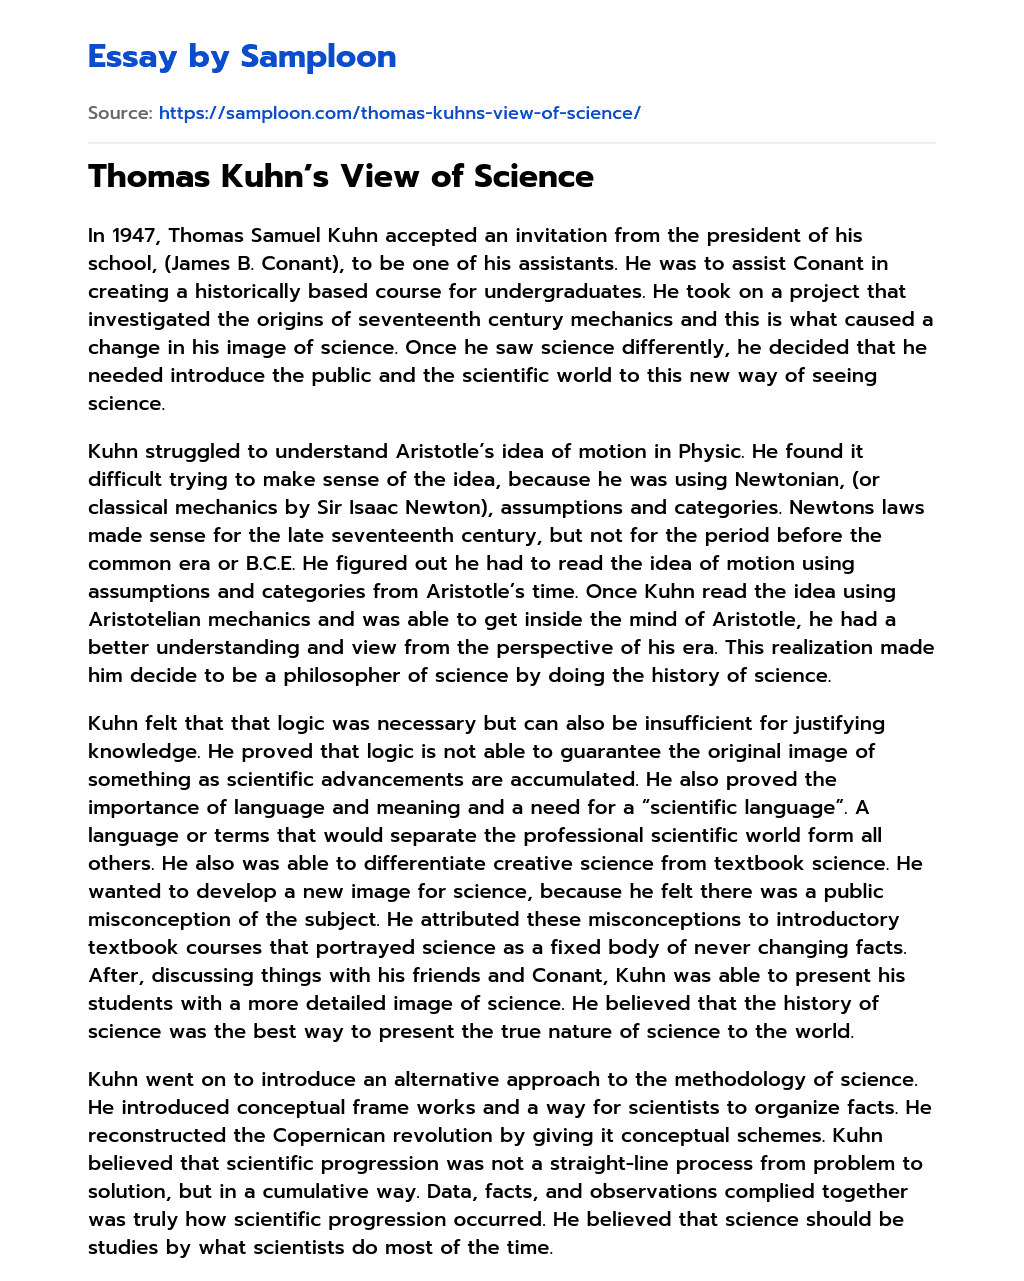 Thomas Kuhn’s View of Science essay